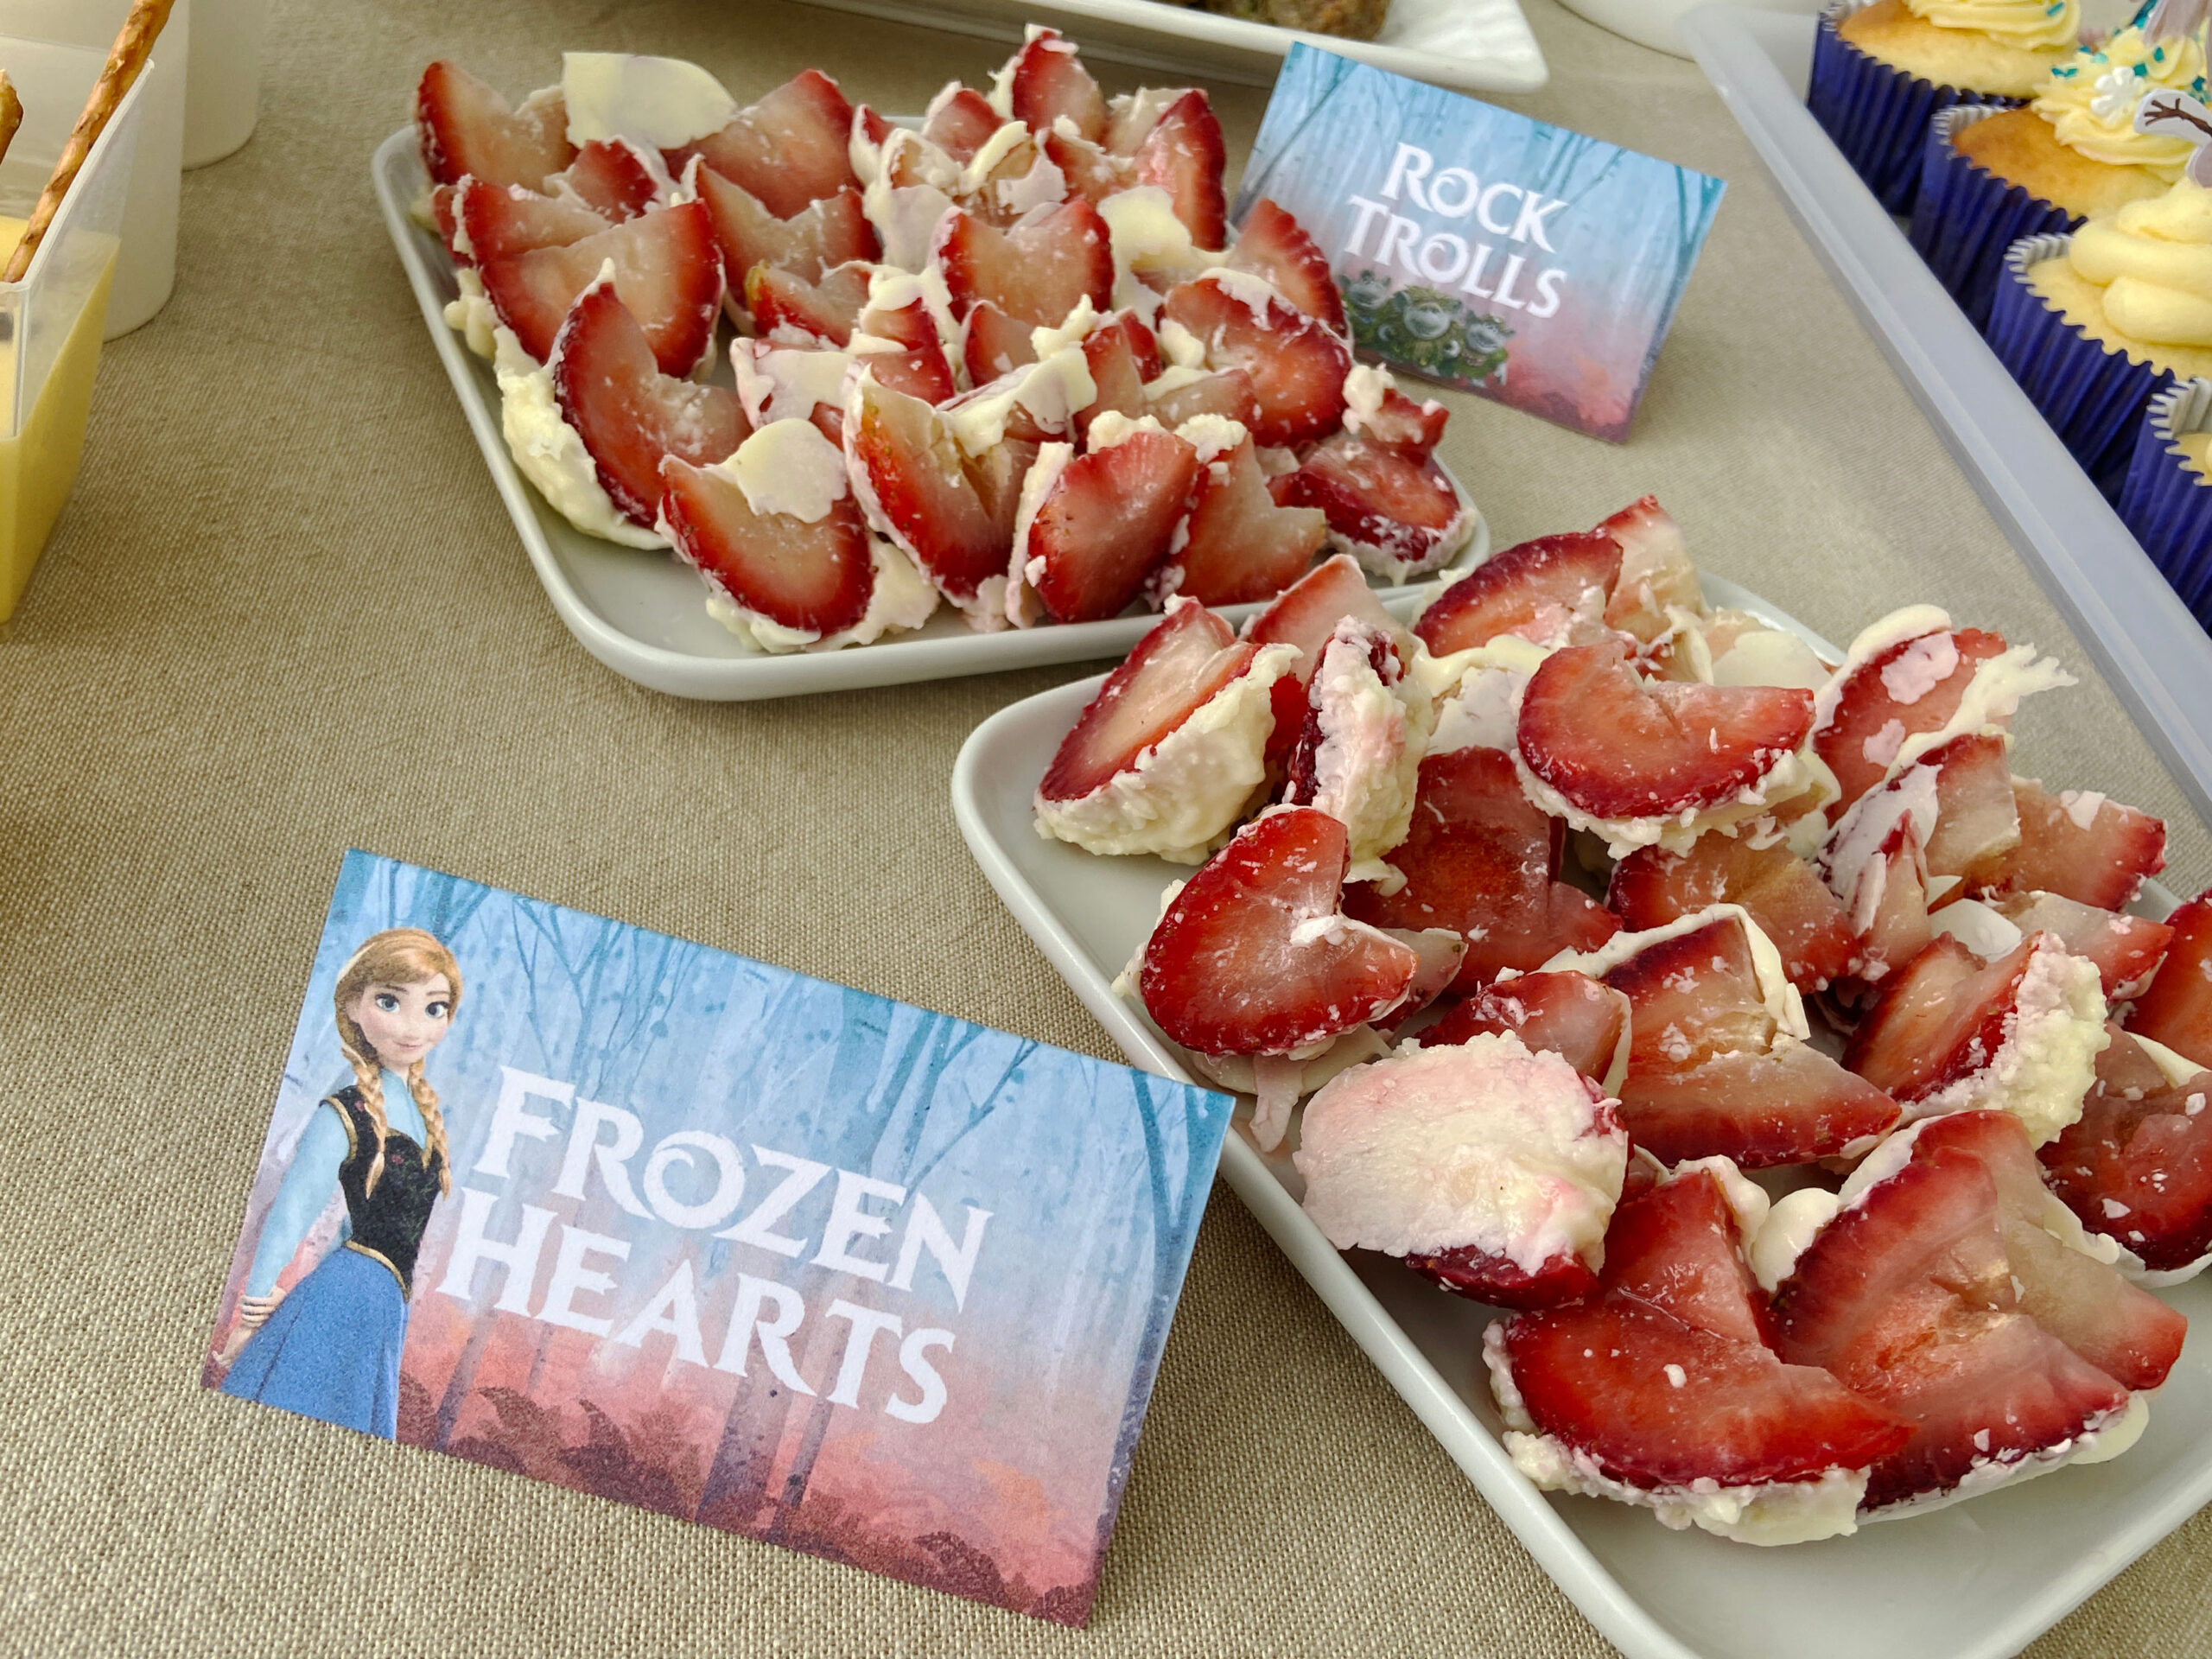 Frozen Hearts Strawberries Frozen Themed Party Food